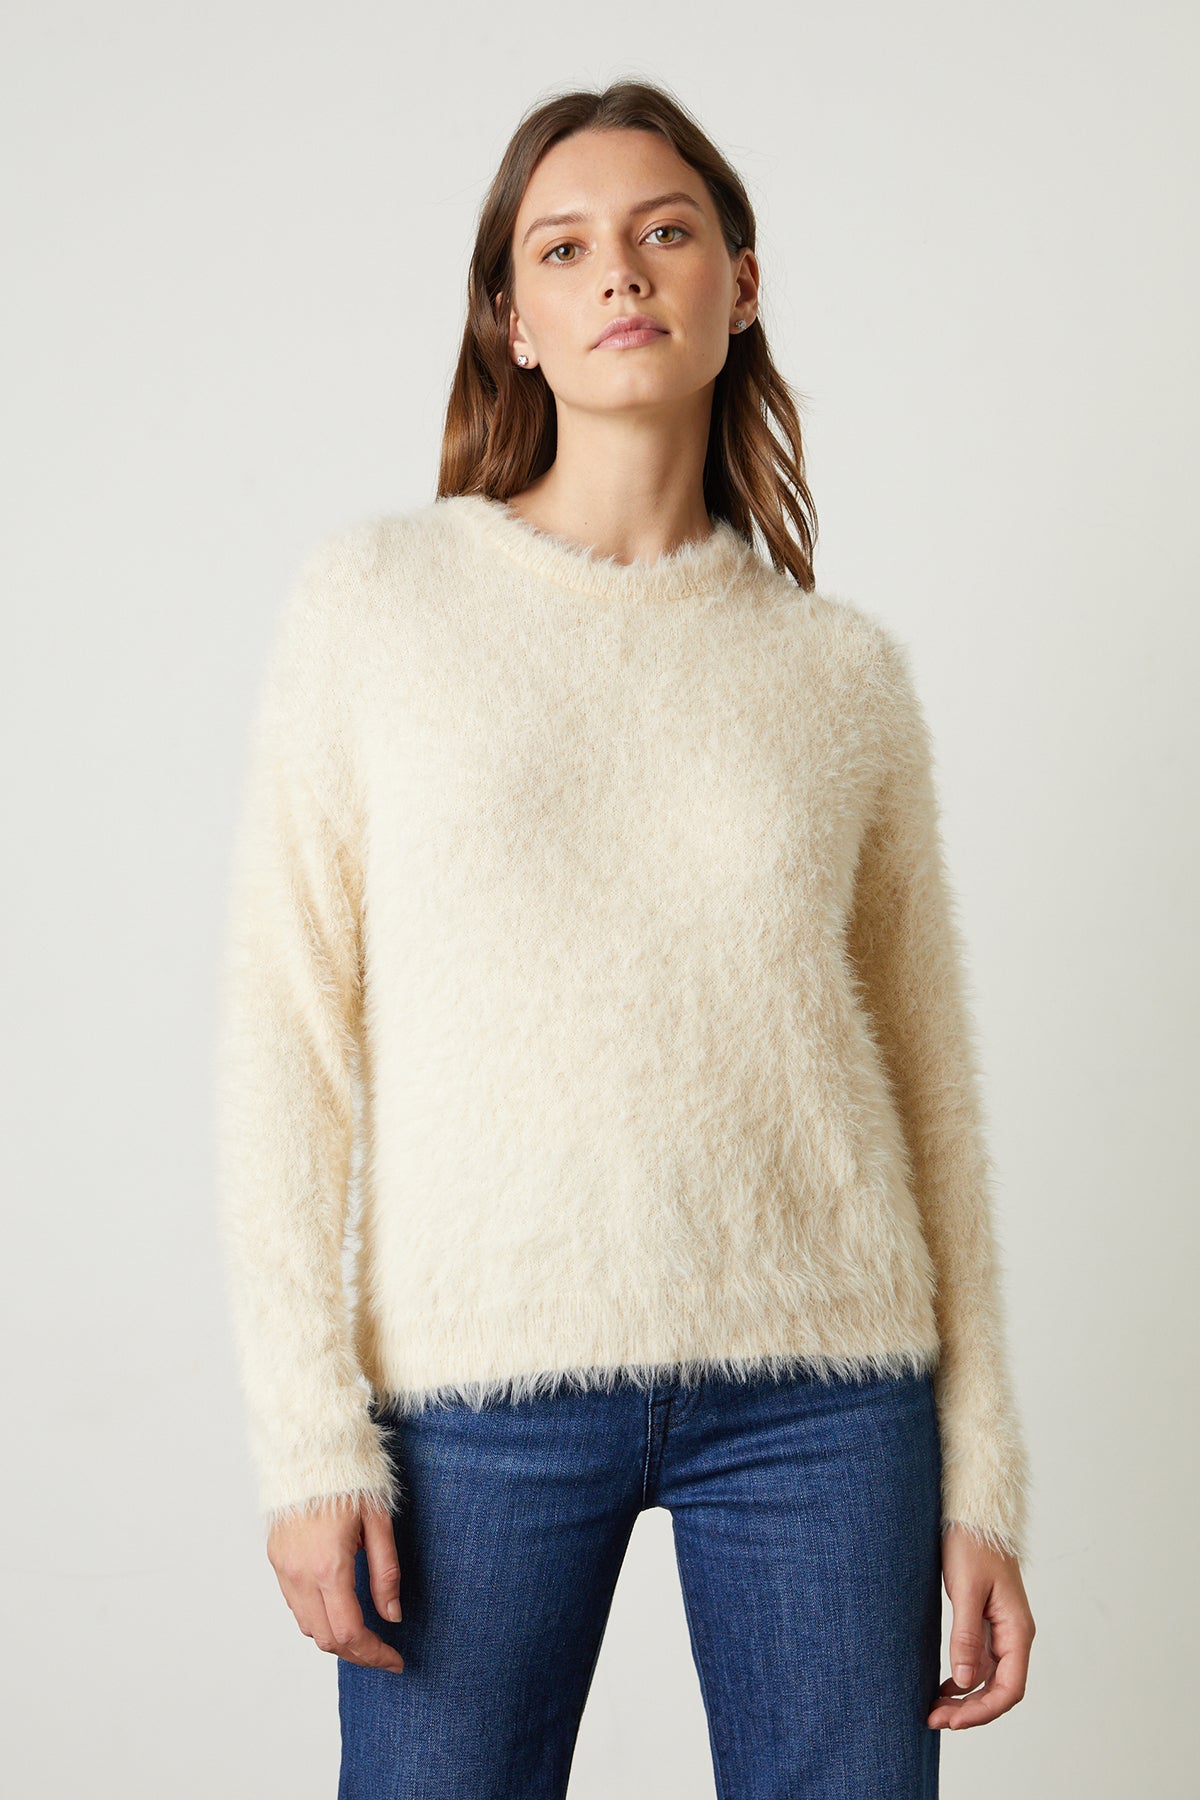 Ray Feather Yarn Crew Neck Sweater in milk front with blue denim-25444375888065